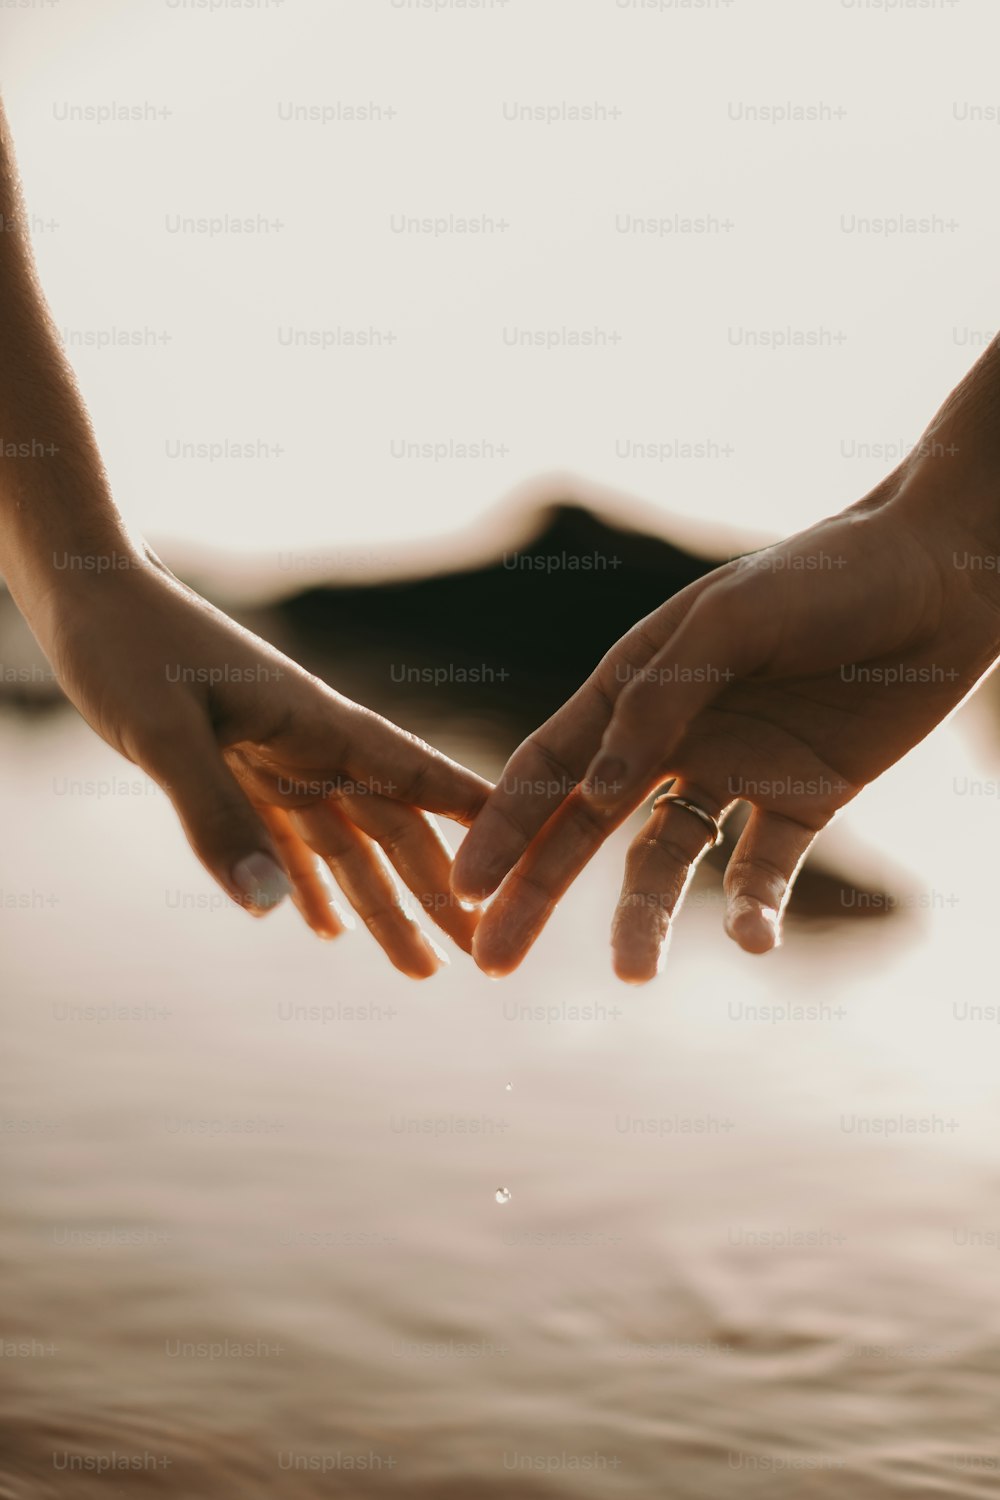 two people holding hands over a body of water